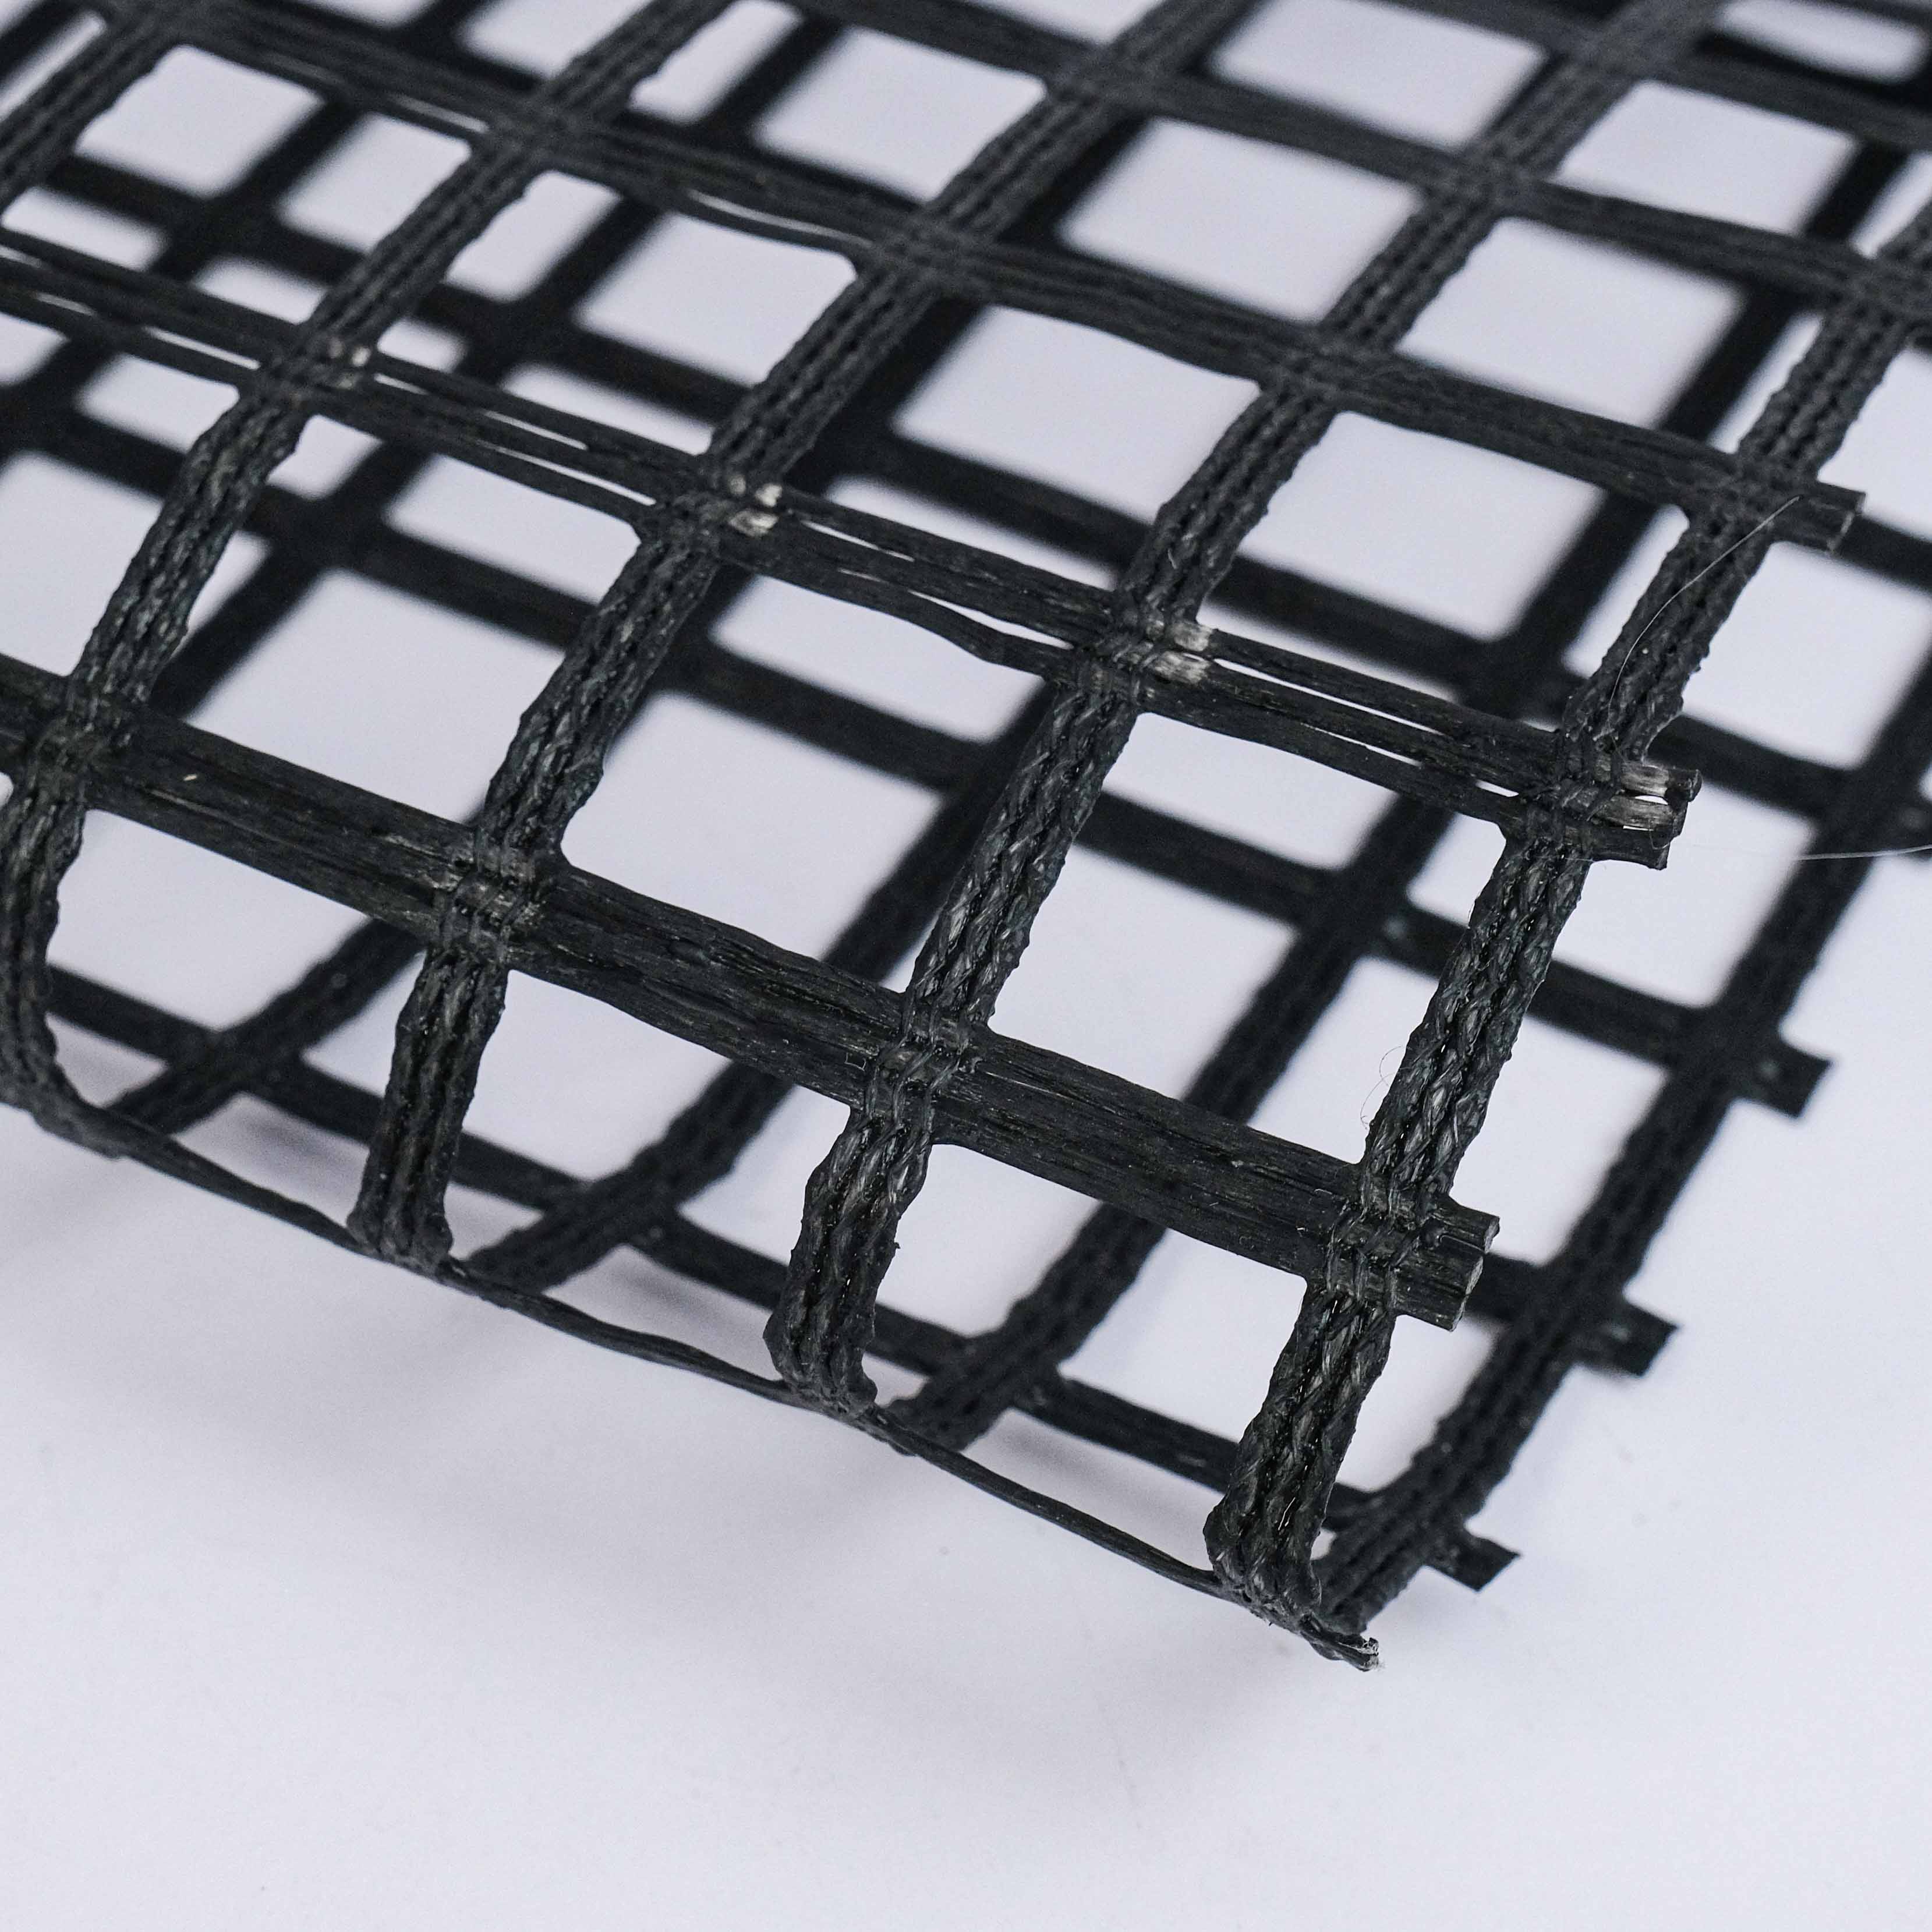 Gerard Daniel Worldwide Acquires Wire Cloth Manufacturers Inc., Creating the Largest Wire Mesh Supplier in North America